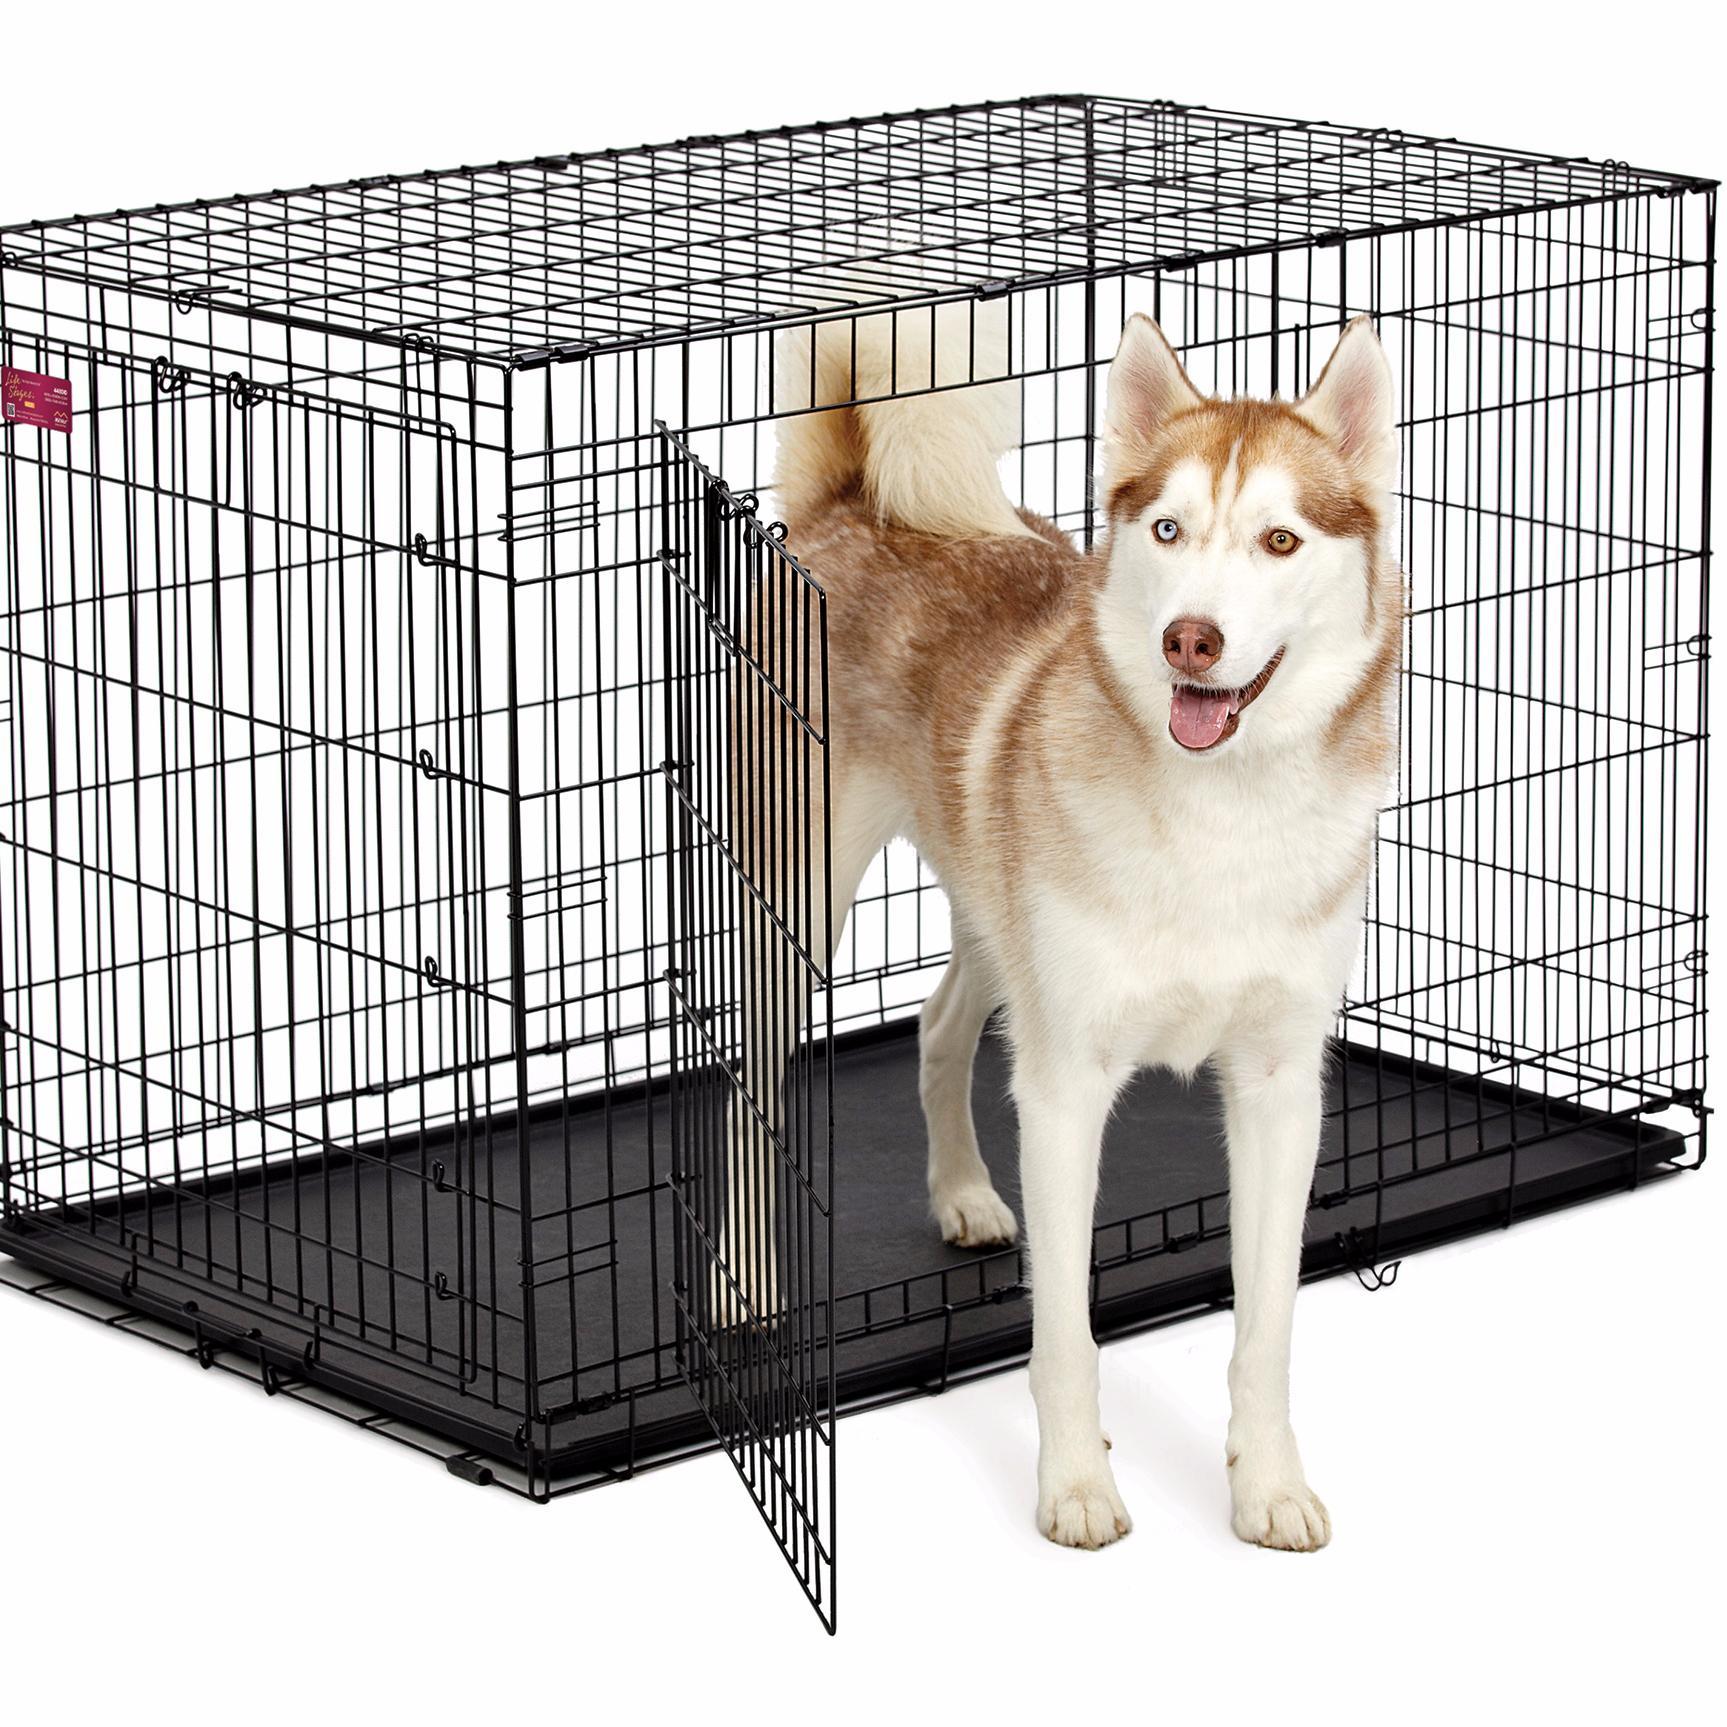 We are a small family-owned online pet supplies retailer with a focus on wire crates, kennels, wood crates, beds and more! Competitive prices. Free Shipping.